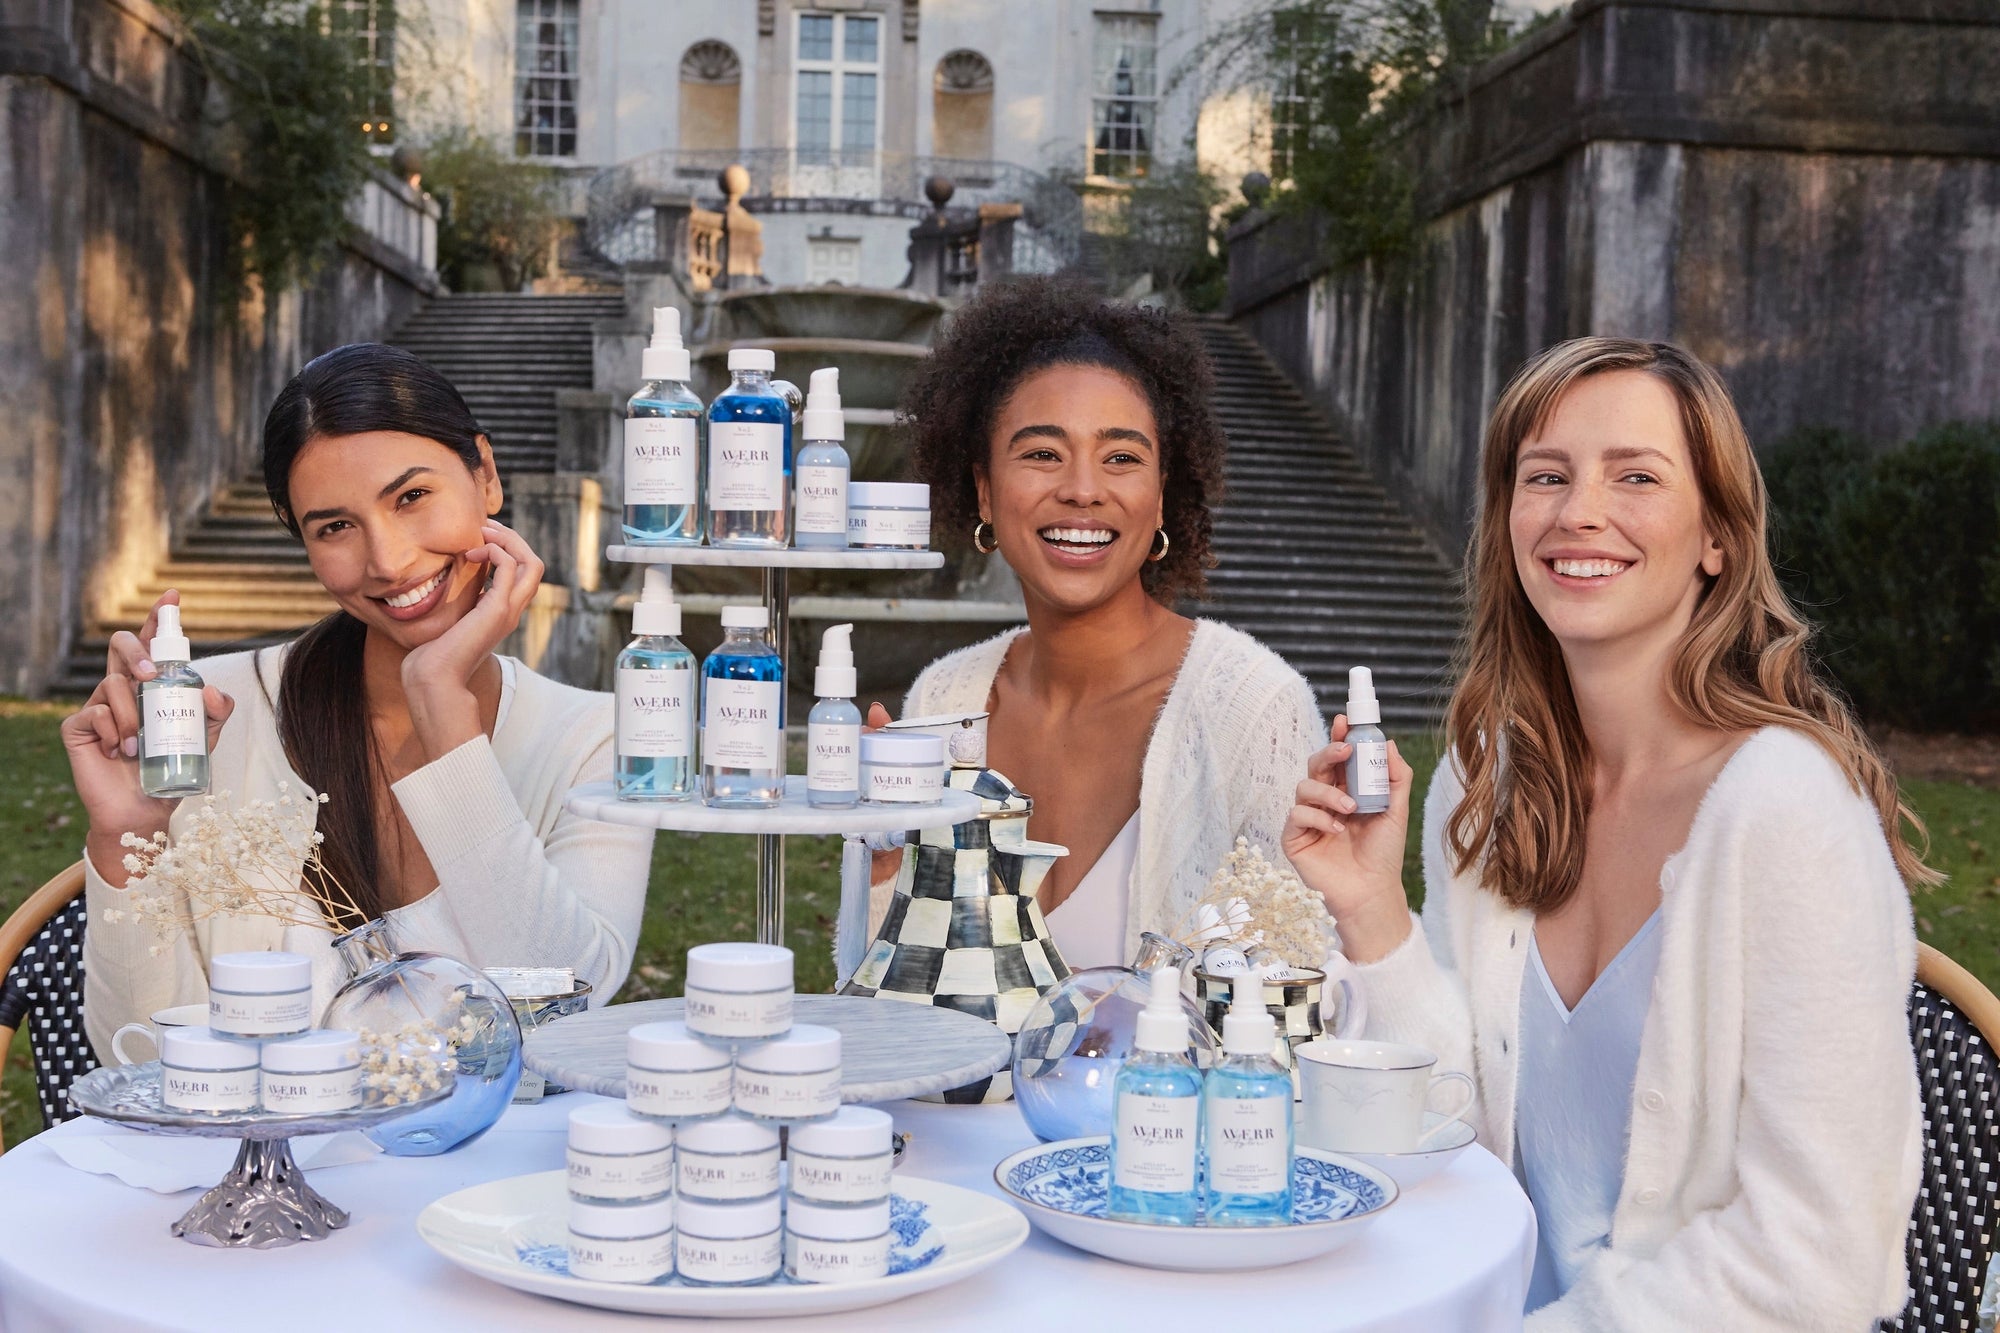 Party of women people enjoying their skincare routine together - the blue tansy ingredient